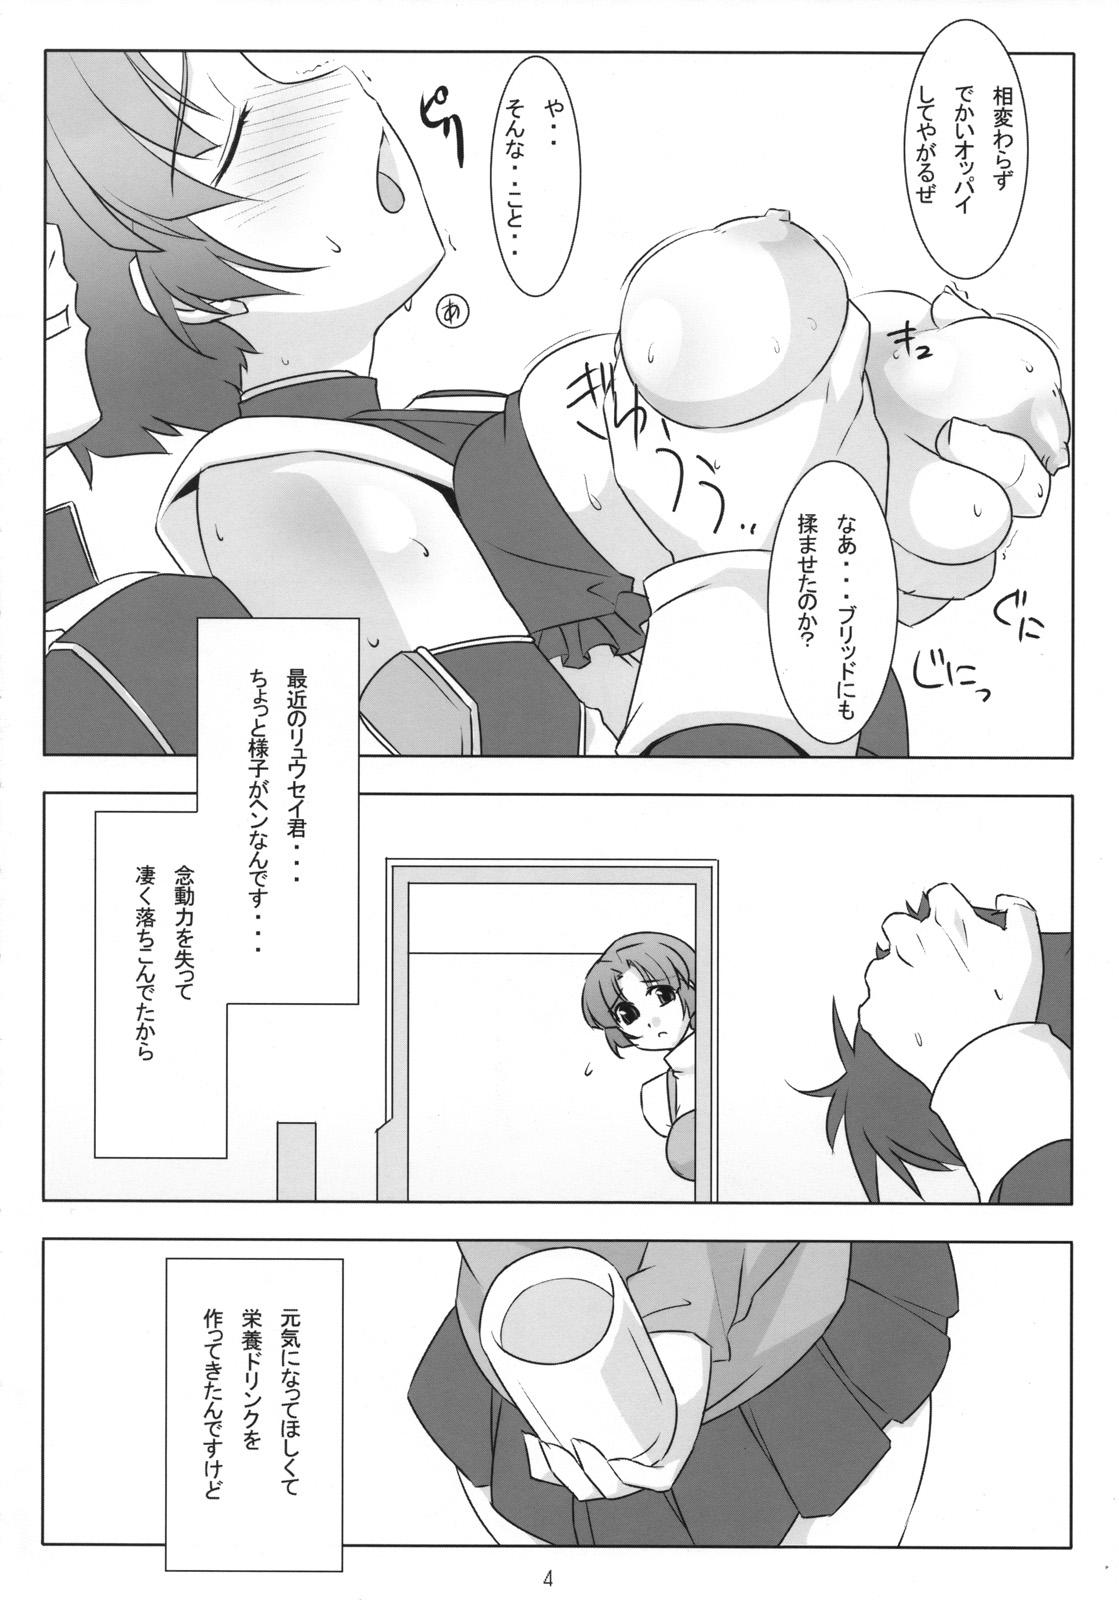 And CHEMICAL SOUP - Super robot wars Hidden - Page 3